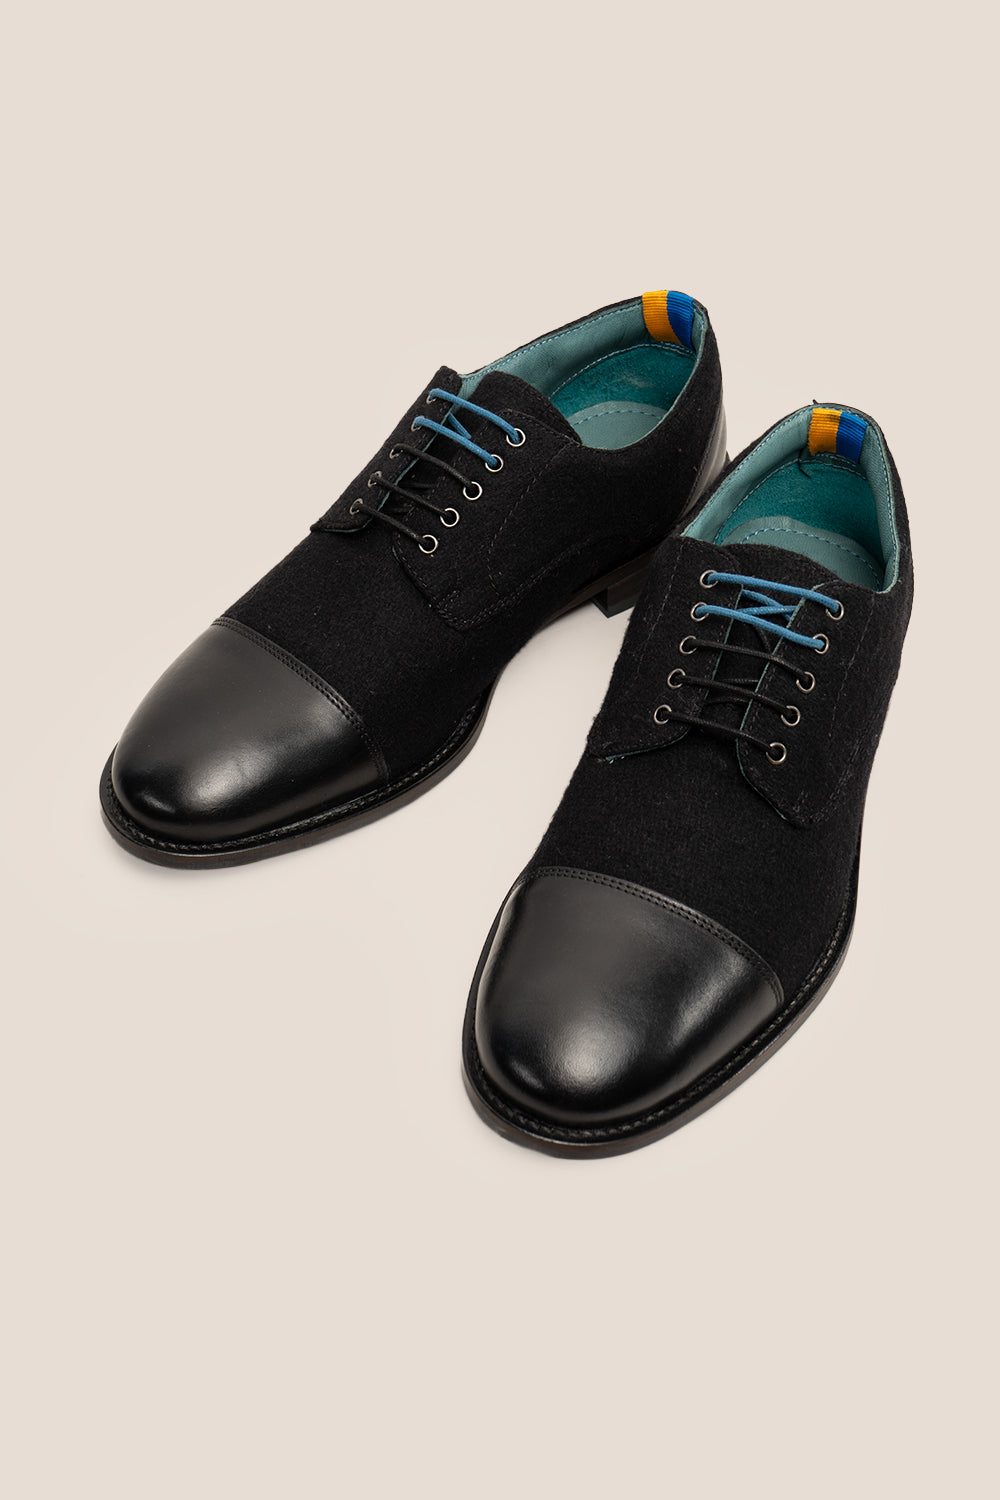 Thomas black leather and felt mens shoes Oswin Hyde